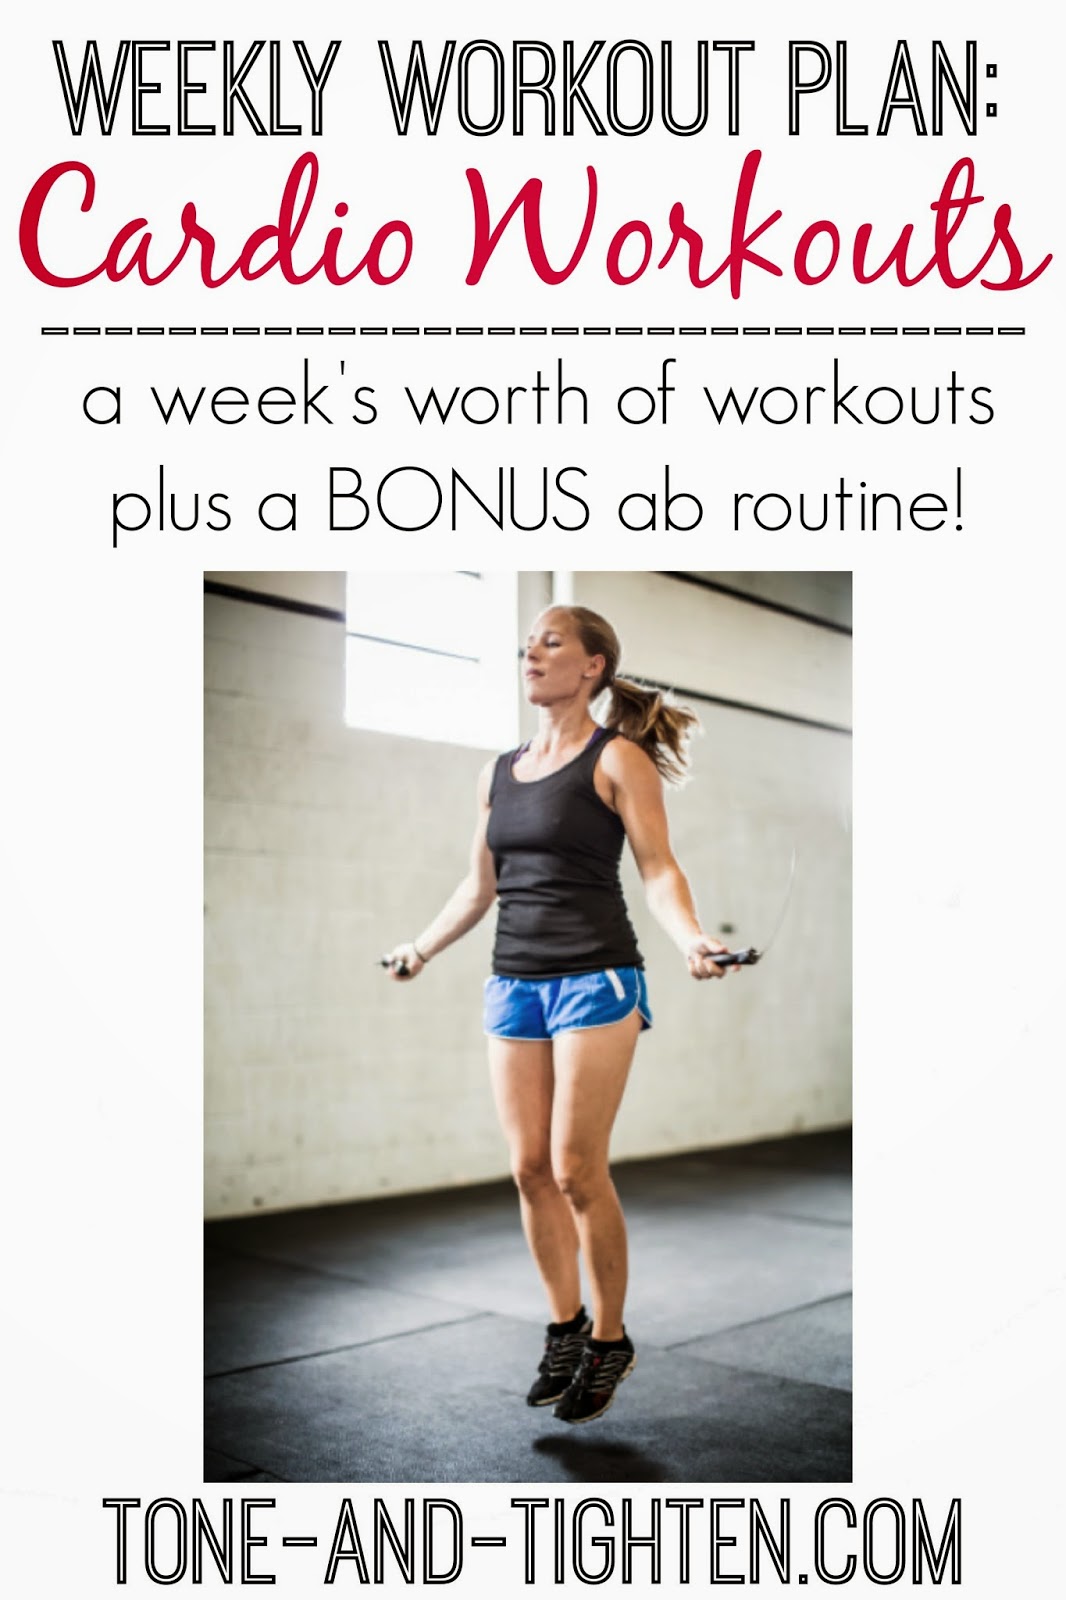 Weekly Workout Plan: Cardio Workouts at Home